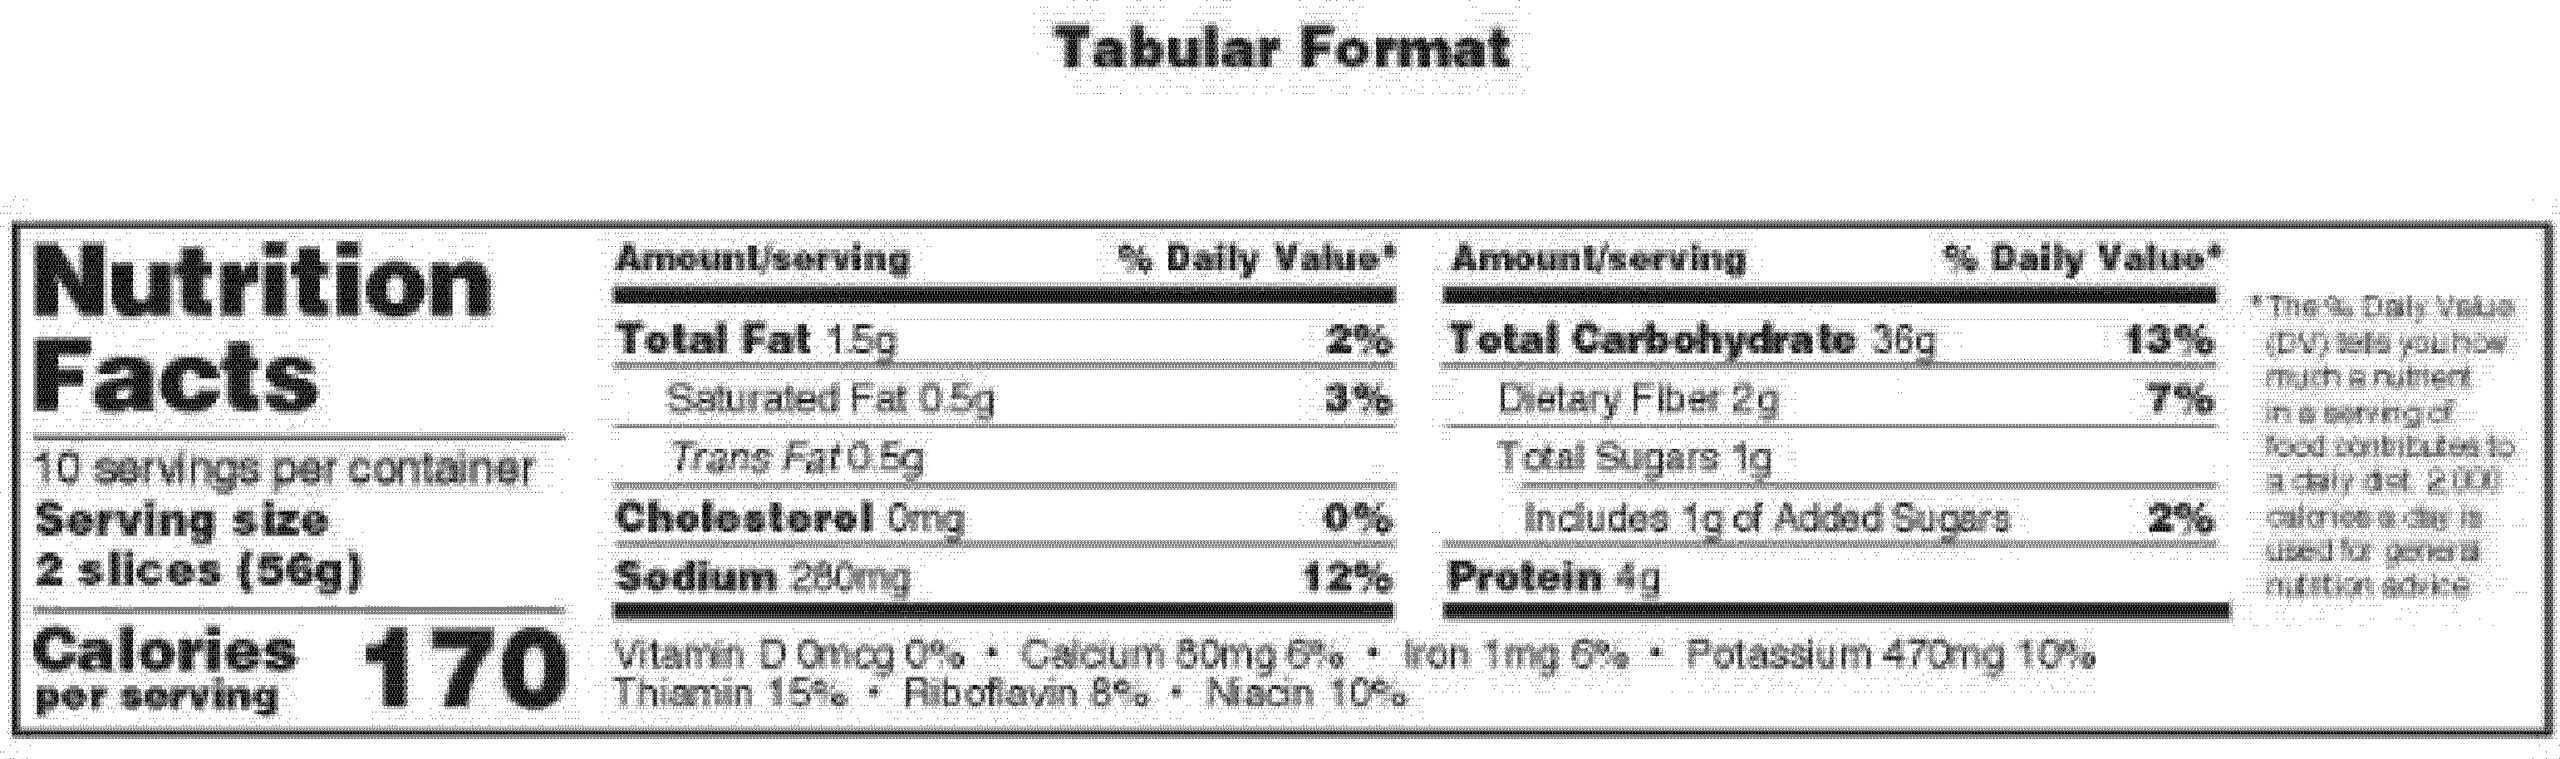 Supplement Facts Label Template Fdating. Free Nutrition Pertaining To Nutrition Label Template Word